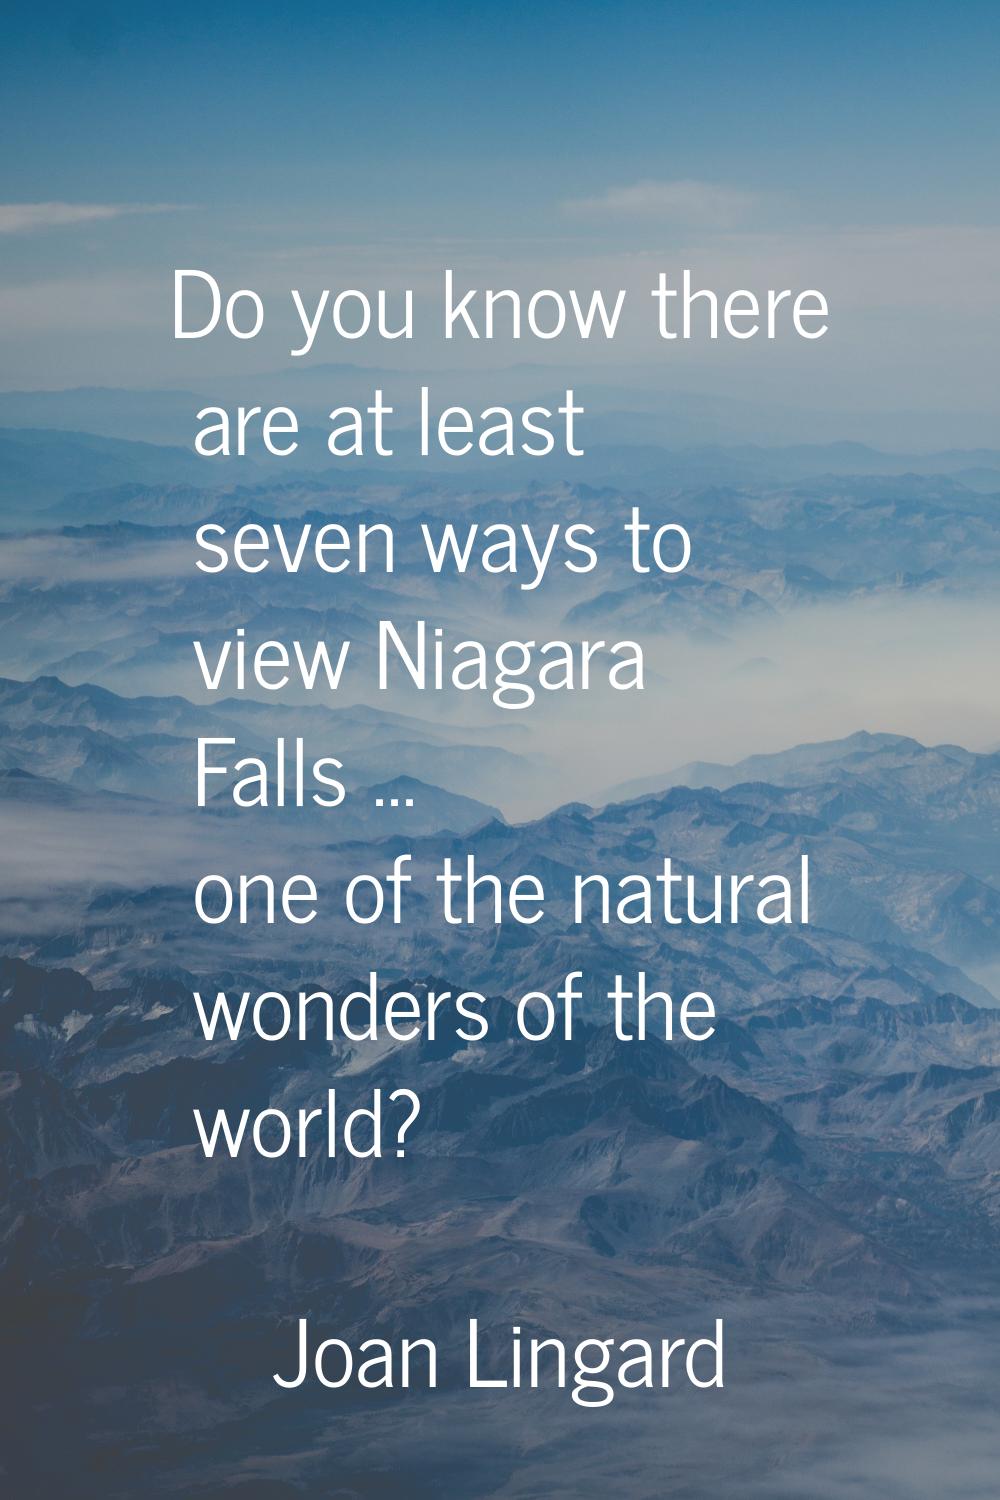 Do you know there are at least seven ways to view Niagara Falls ... one of the natural wonders of t